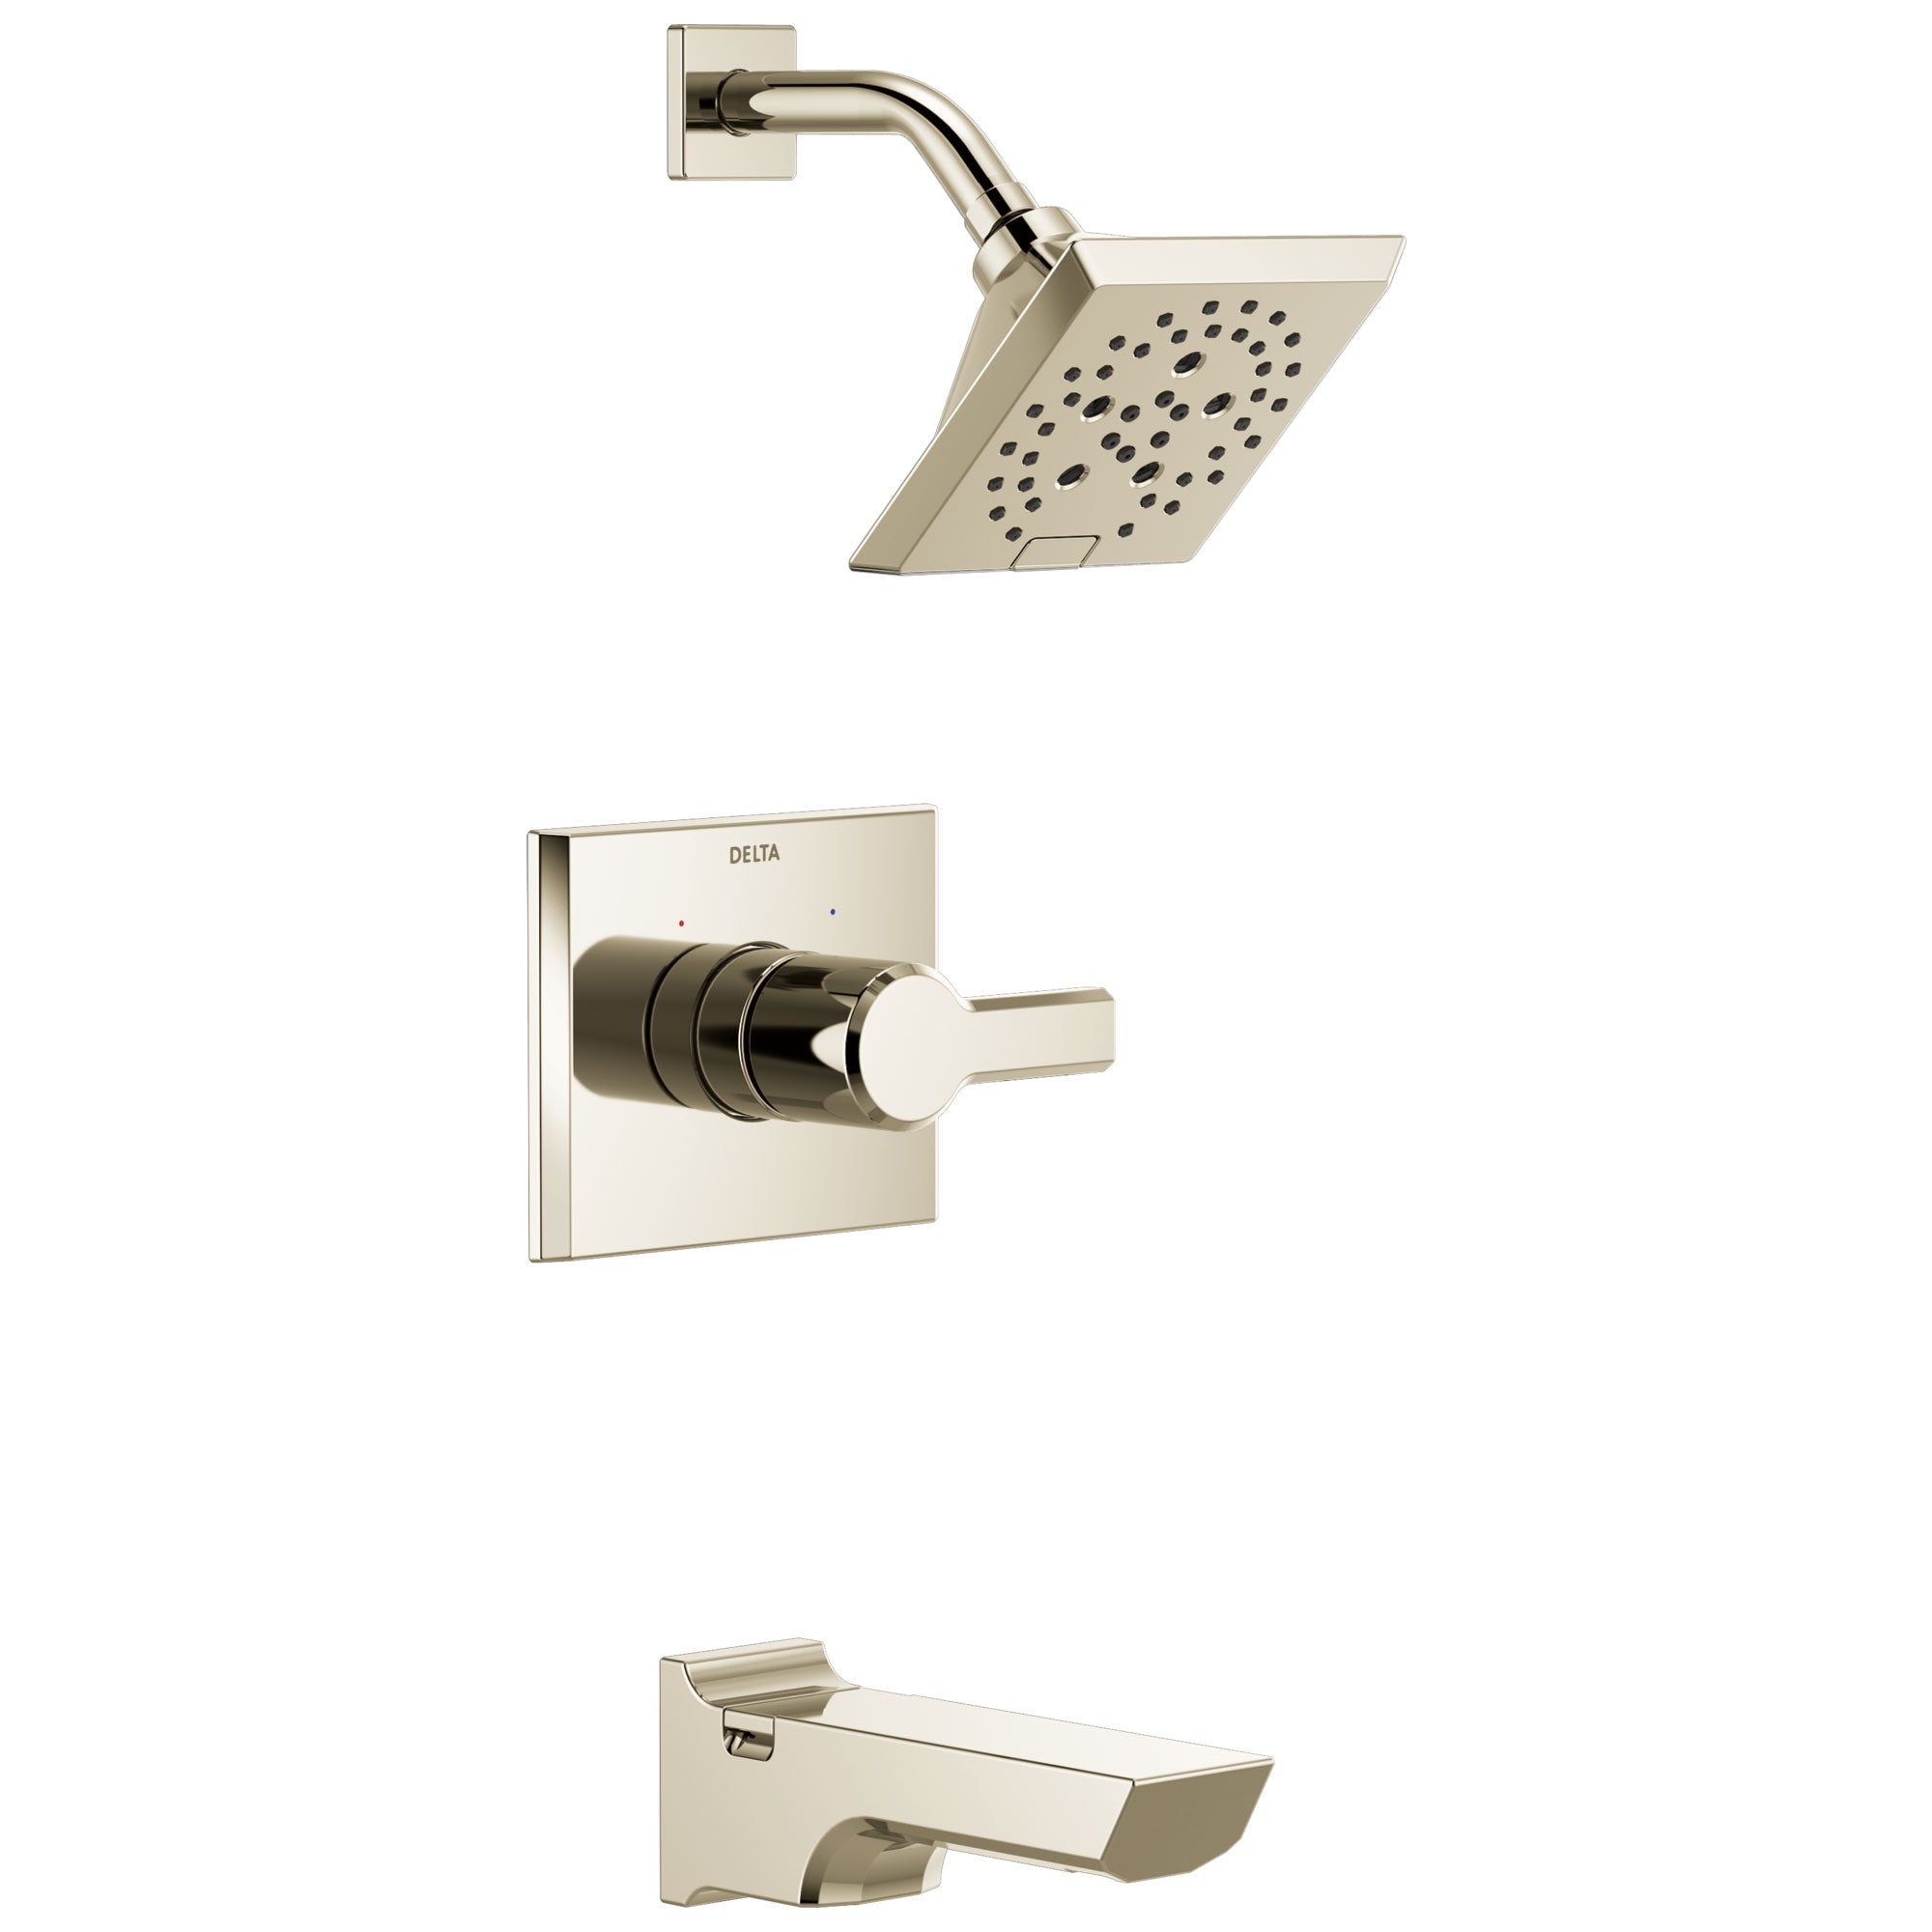 Delta Pivotal Polished Nickel Finish Tub and Shower Combination Faucet Includes Monitor 14 Series Cartridge, Handle, and Valve with Stops D3418V